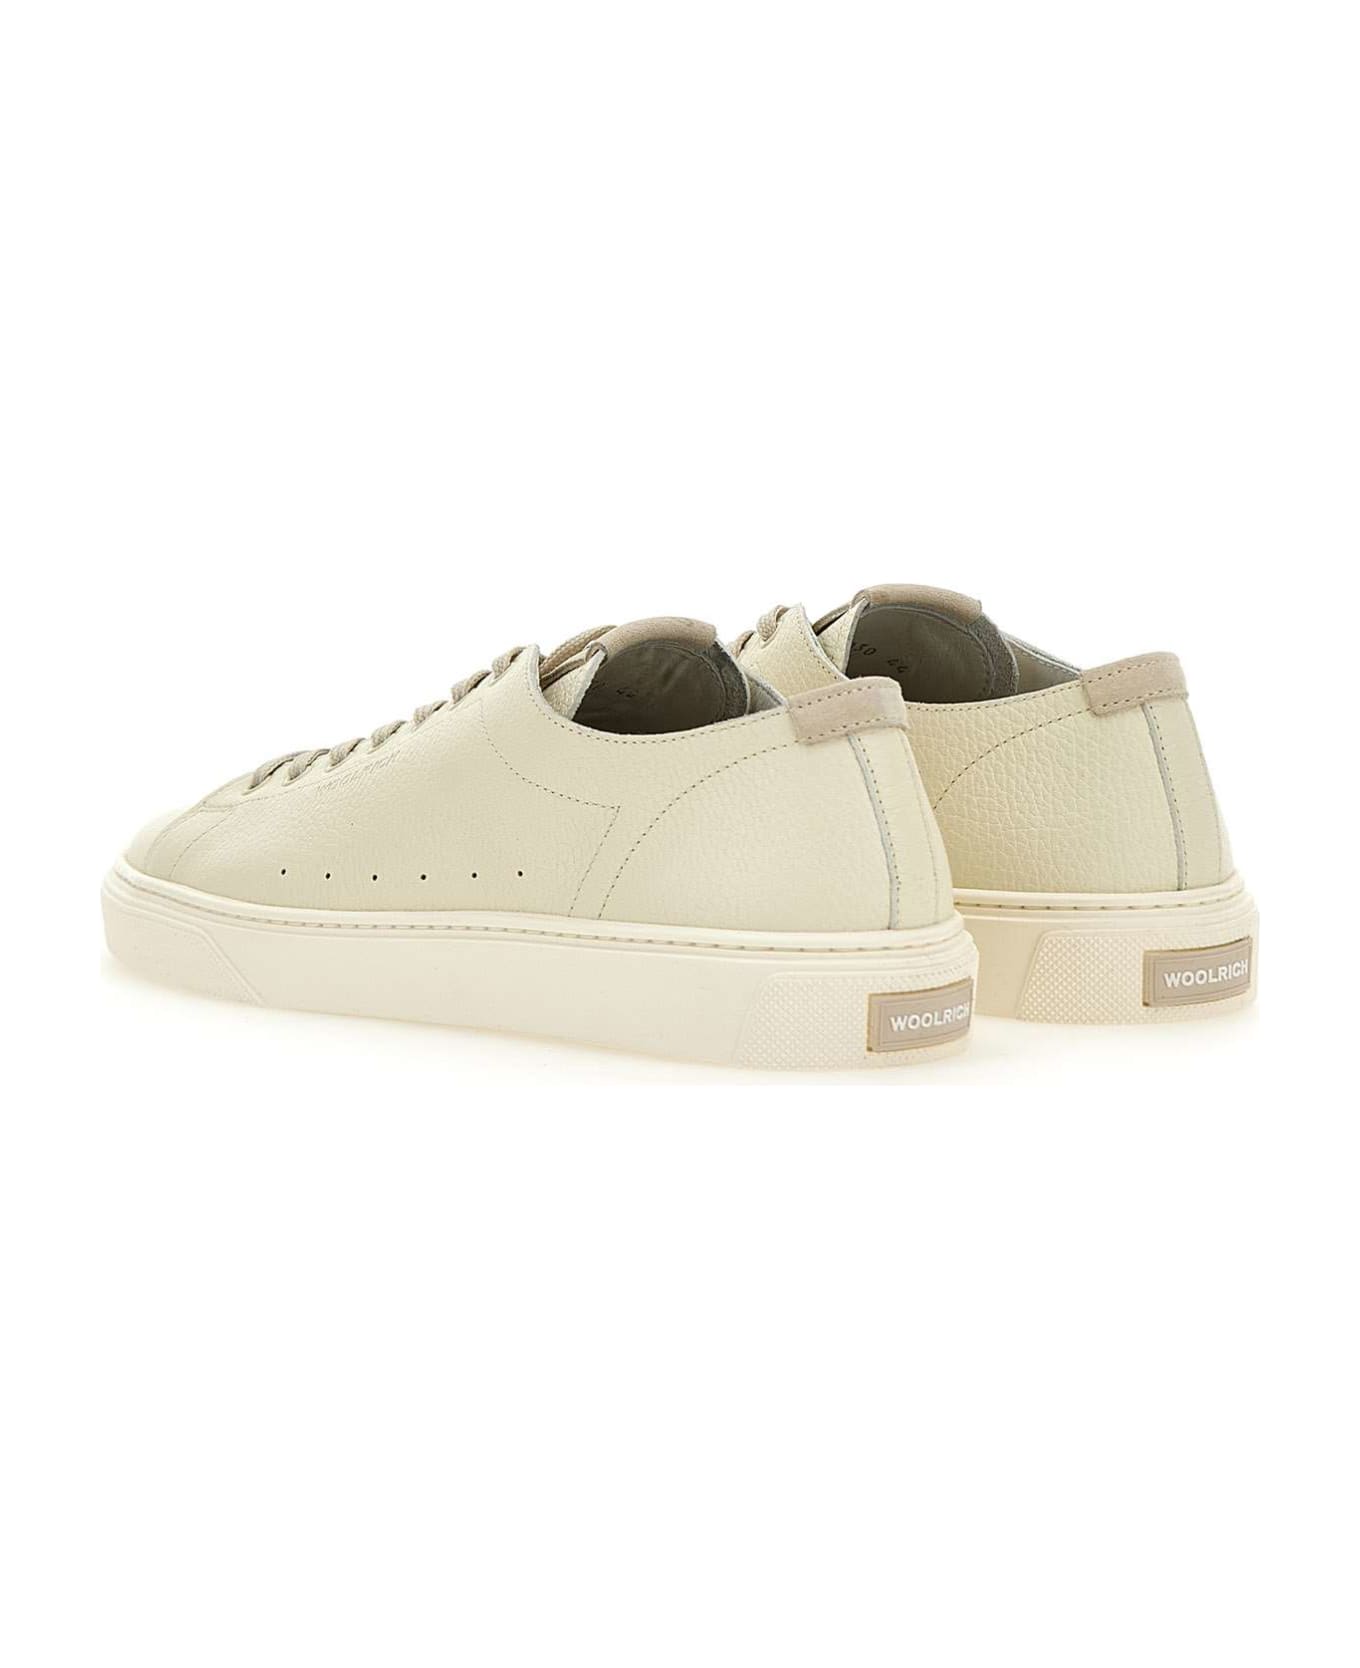 Woolrich "cloudcourt" Leather Sneakers - WHITE スニーカー